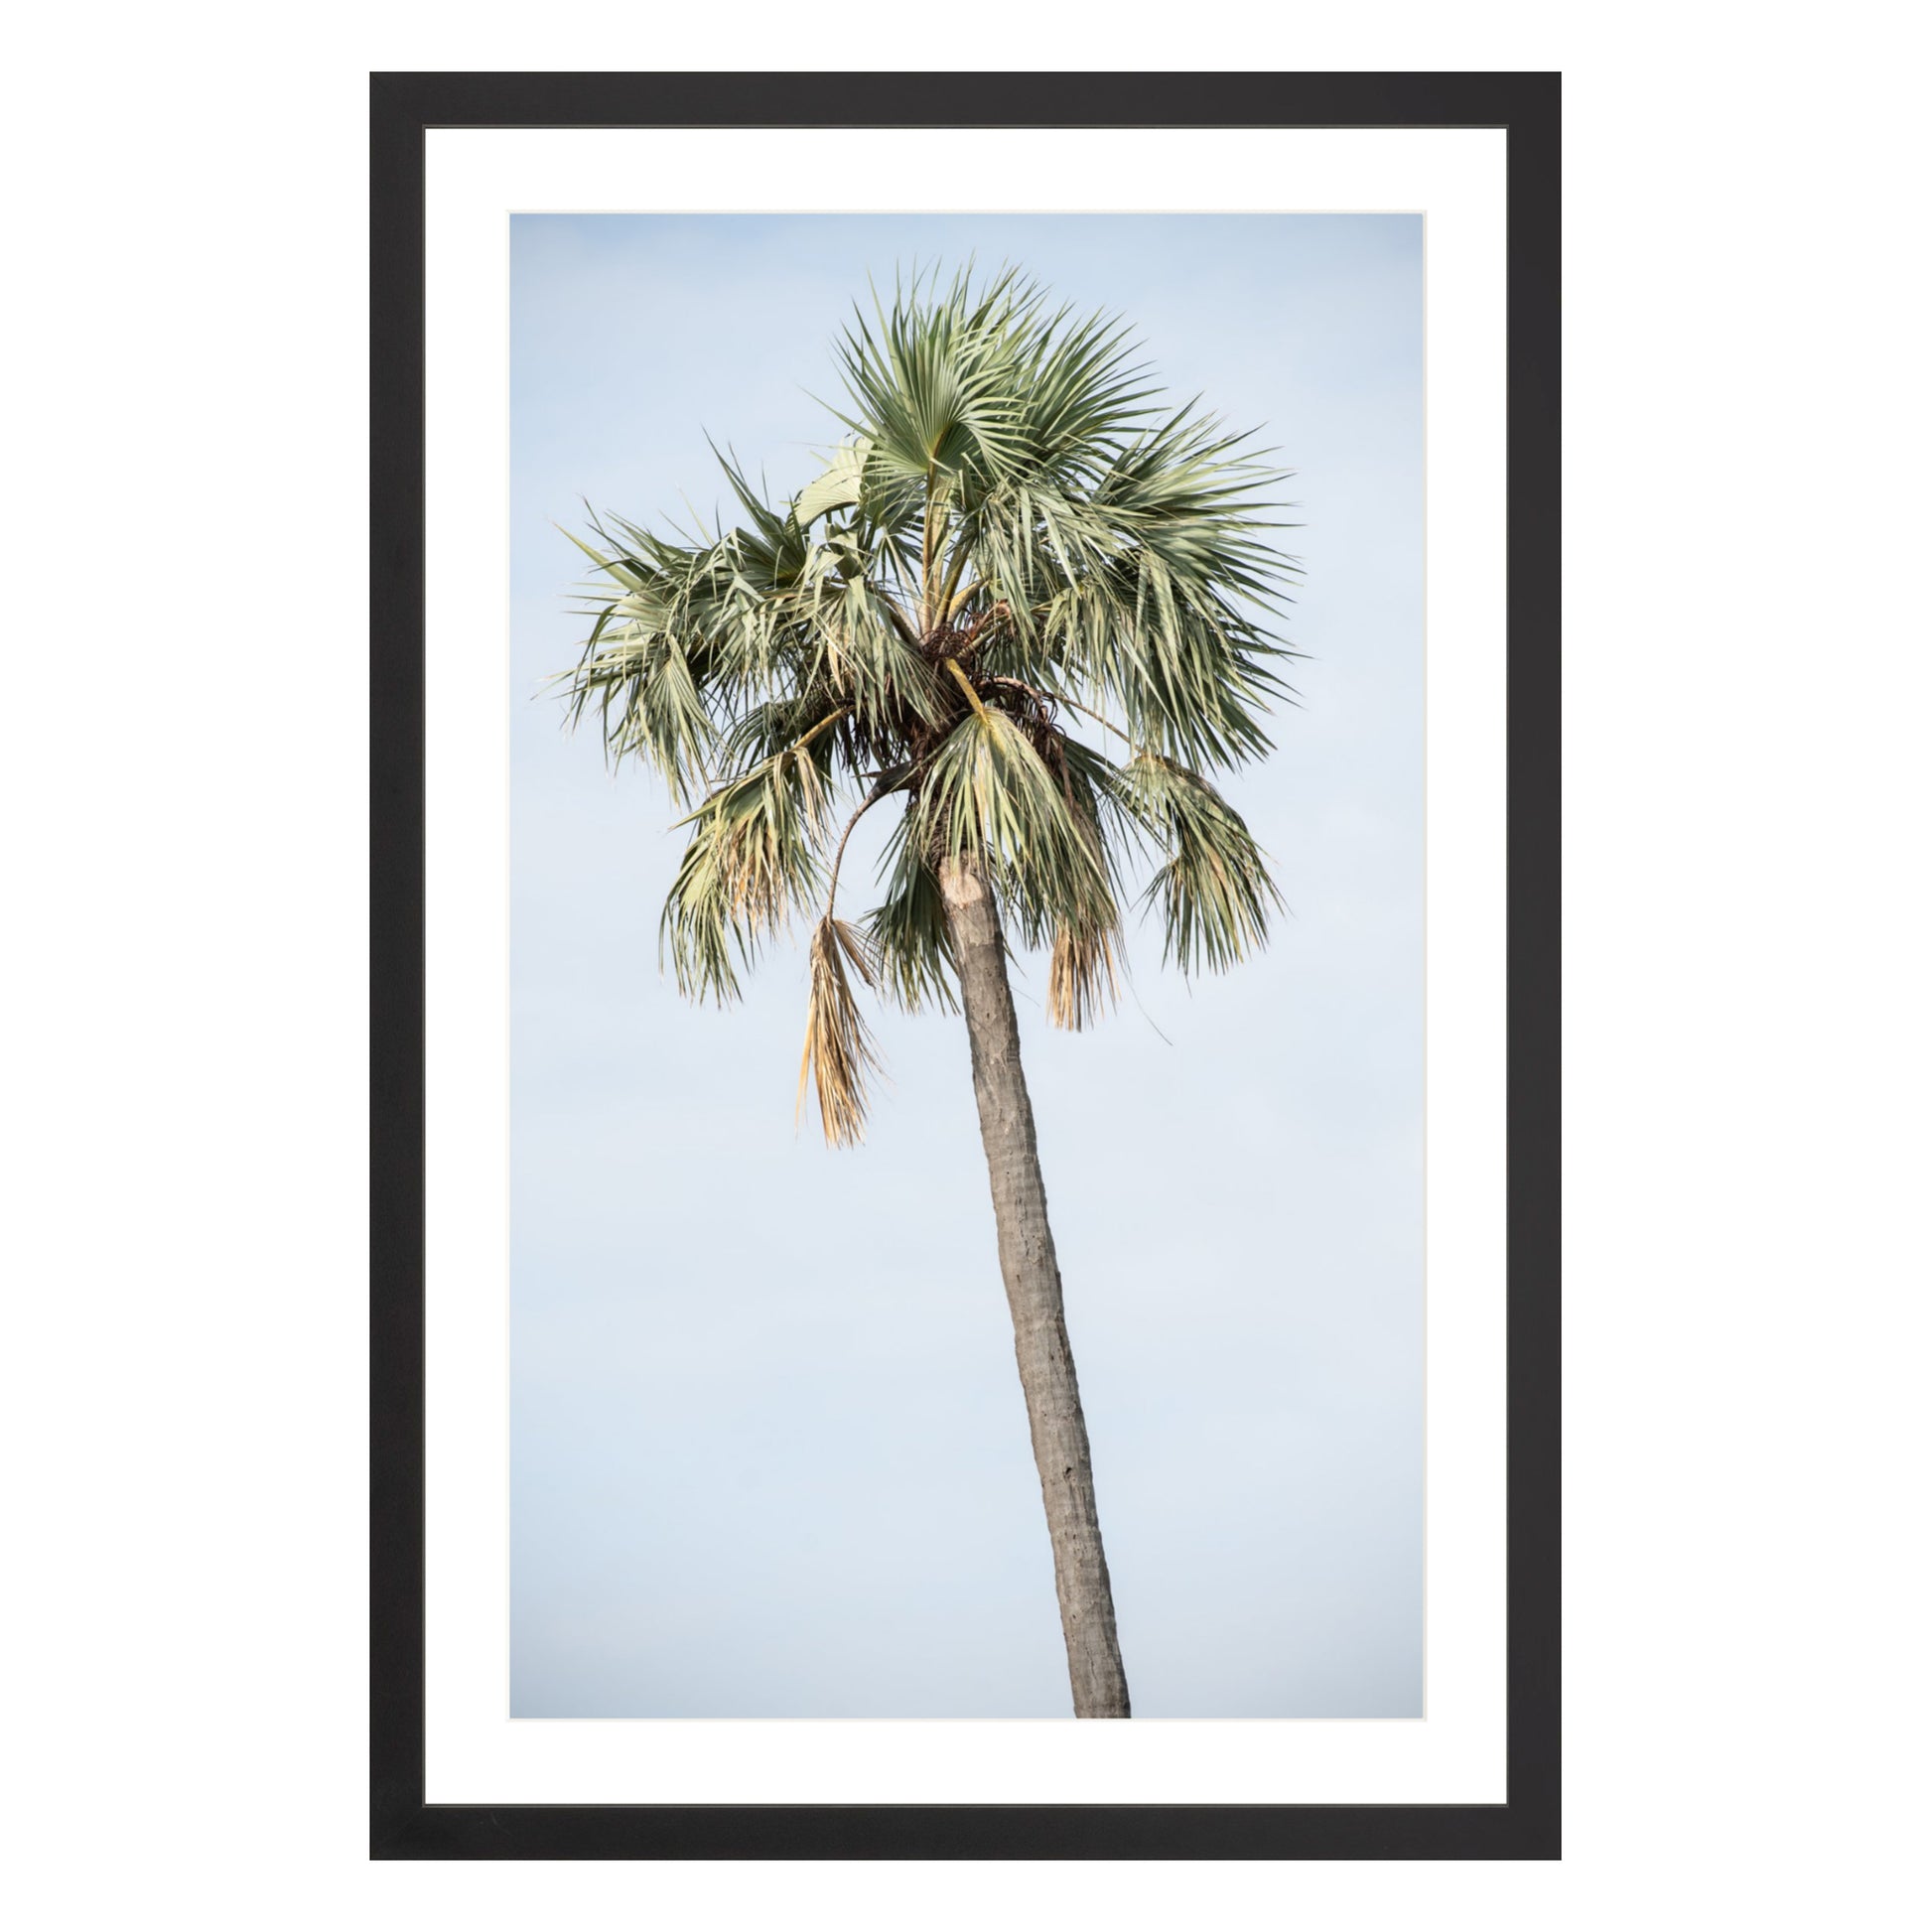 Photograph of a palm tree in Tanzania, framed in black with white mat